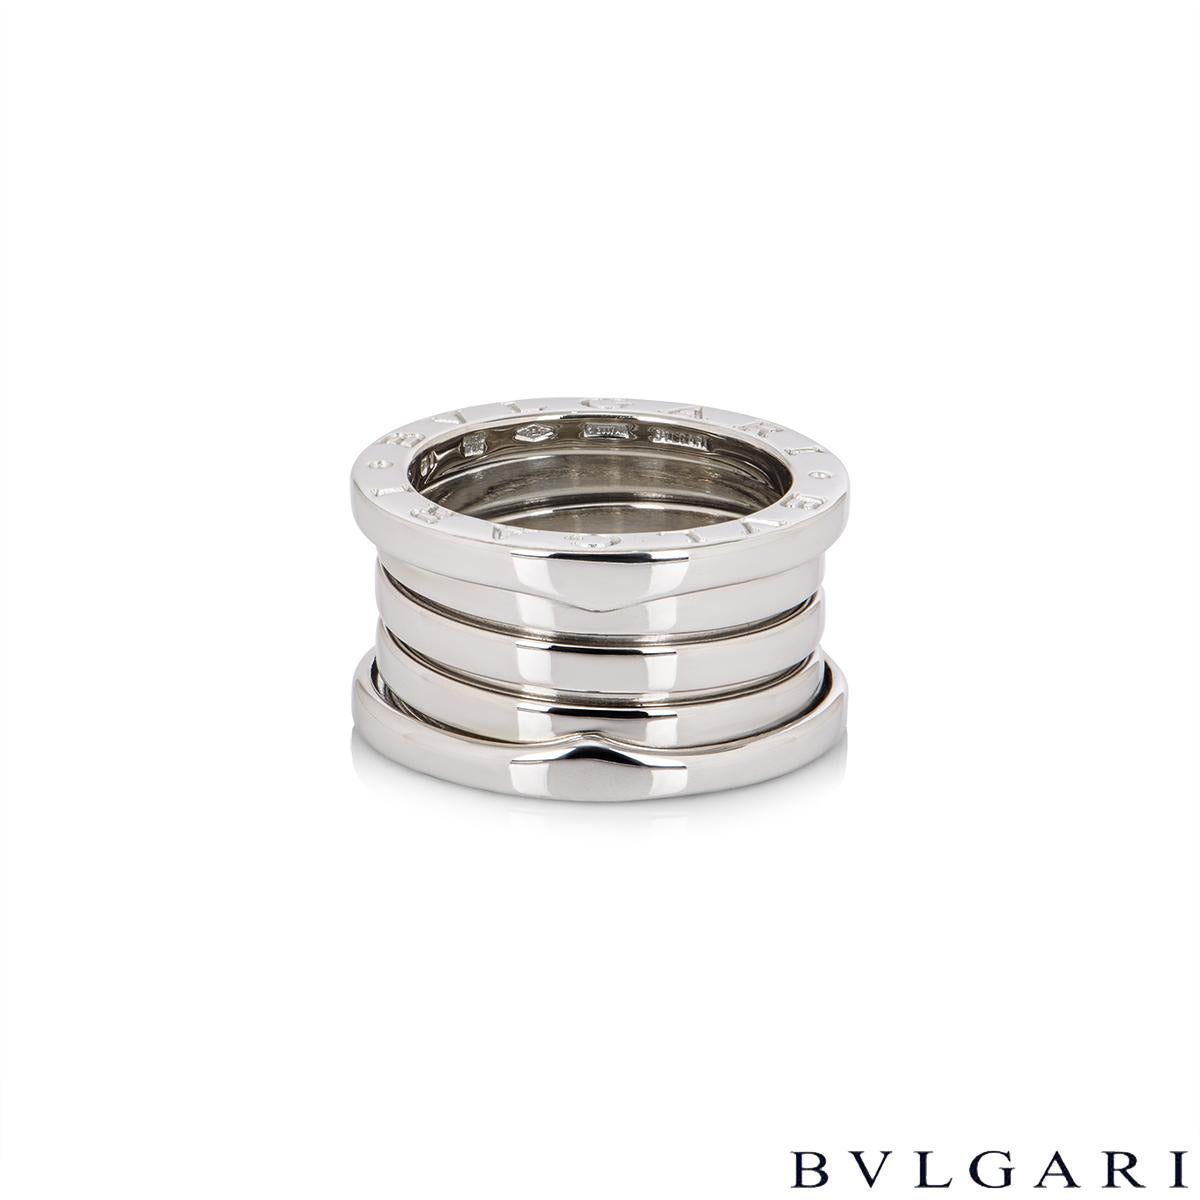 Bvlgari White Gold B.Zero1 Ring 323554 In Excellent Condition For Sale In London, GB